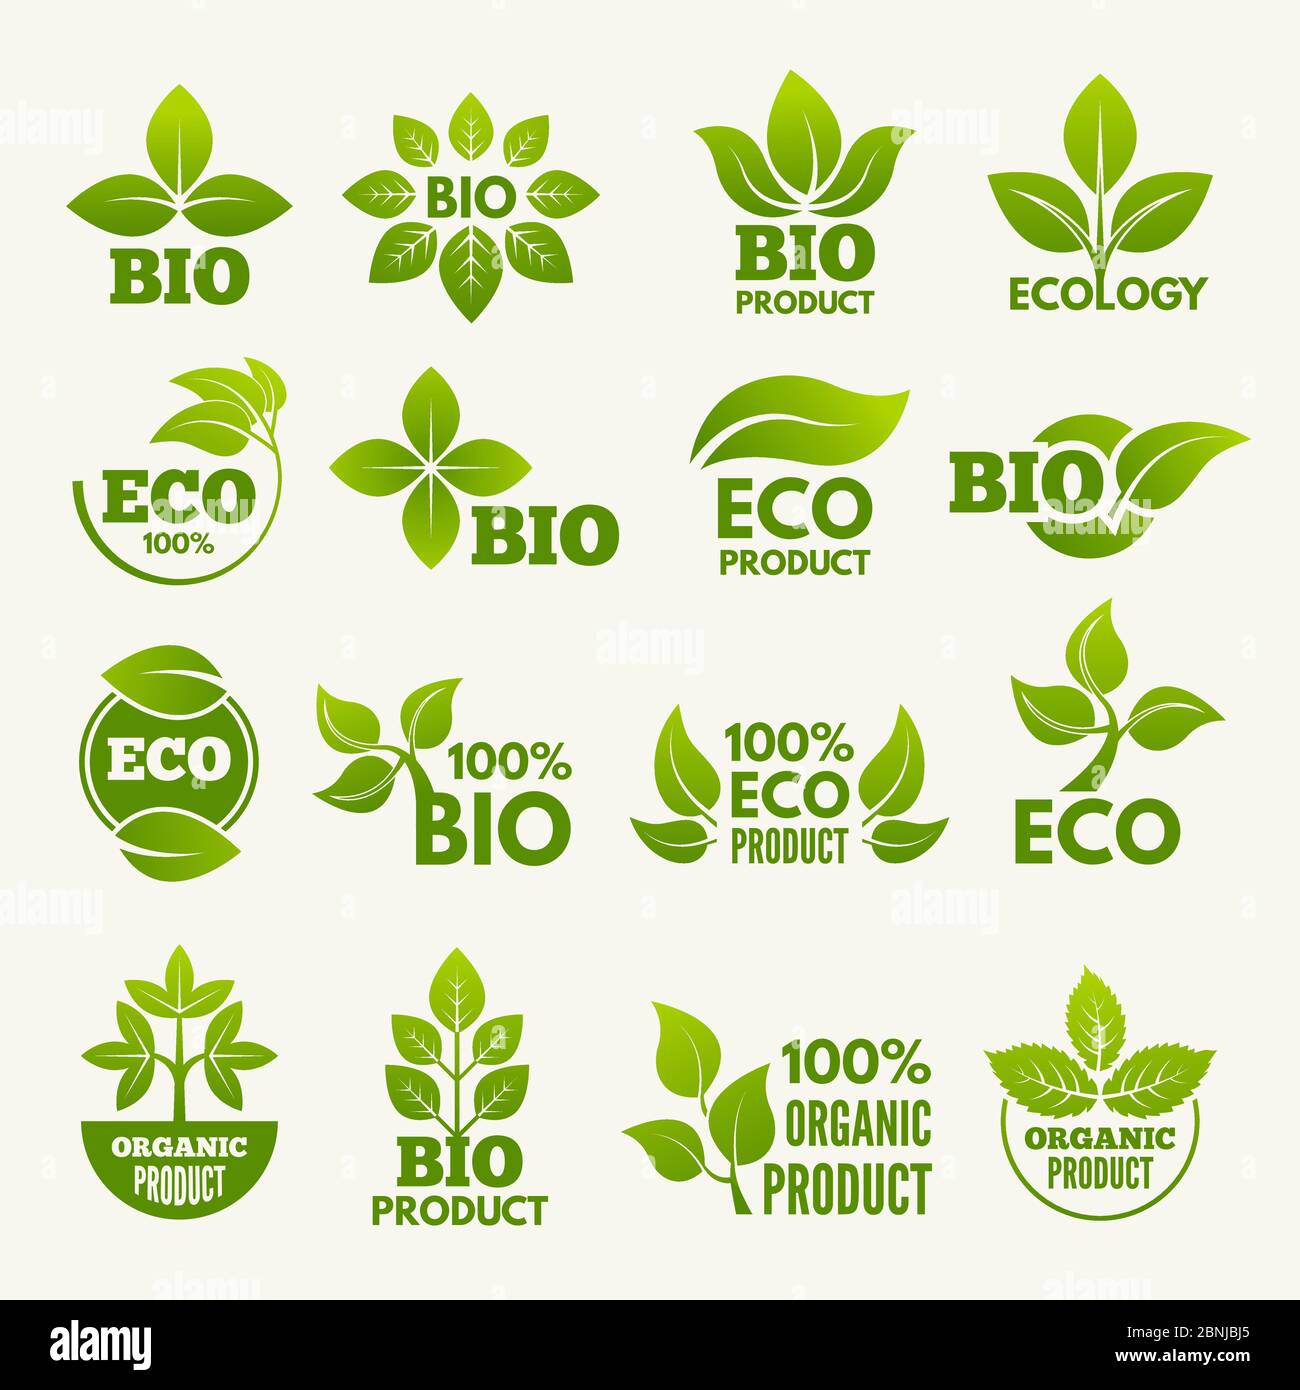 Organic eco logos and labels with illustrations of leaves Stock Vector